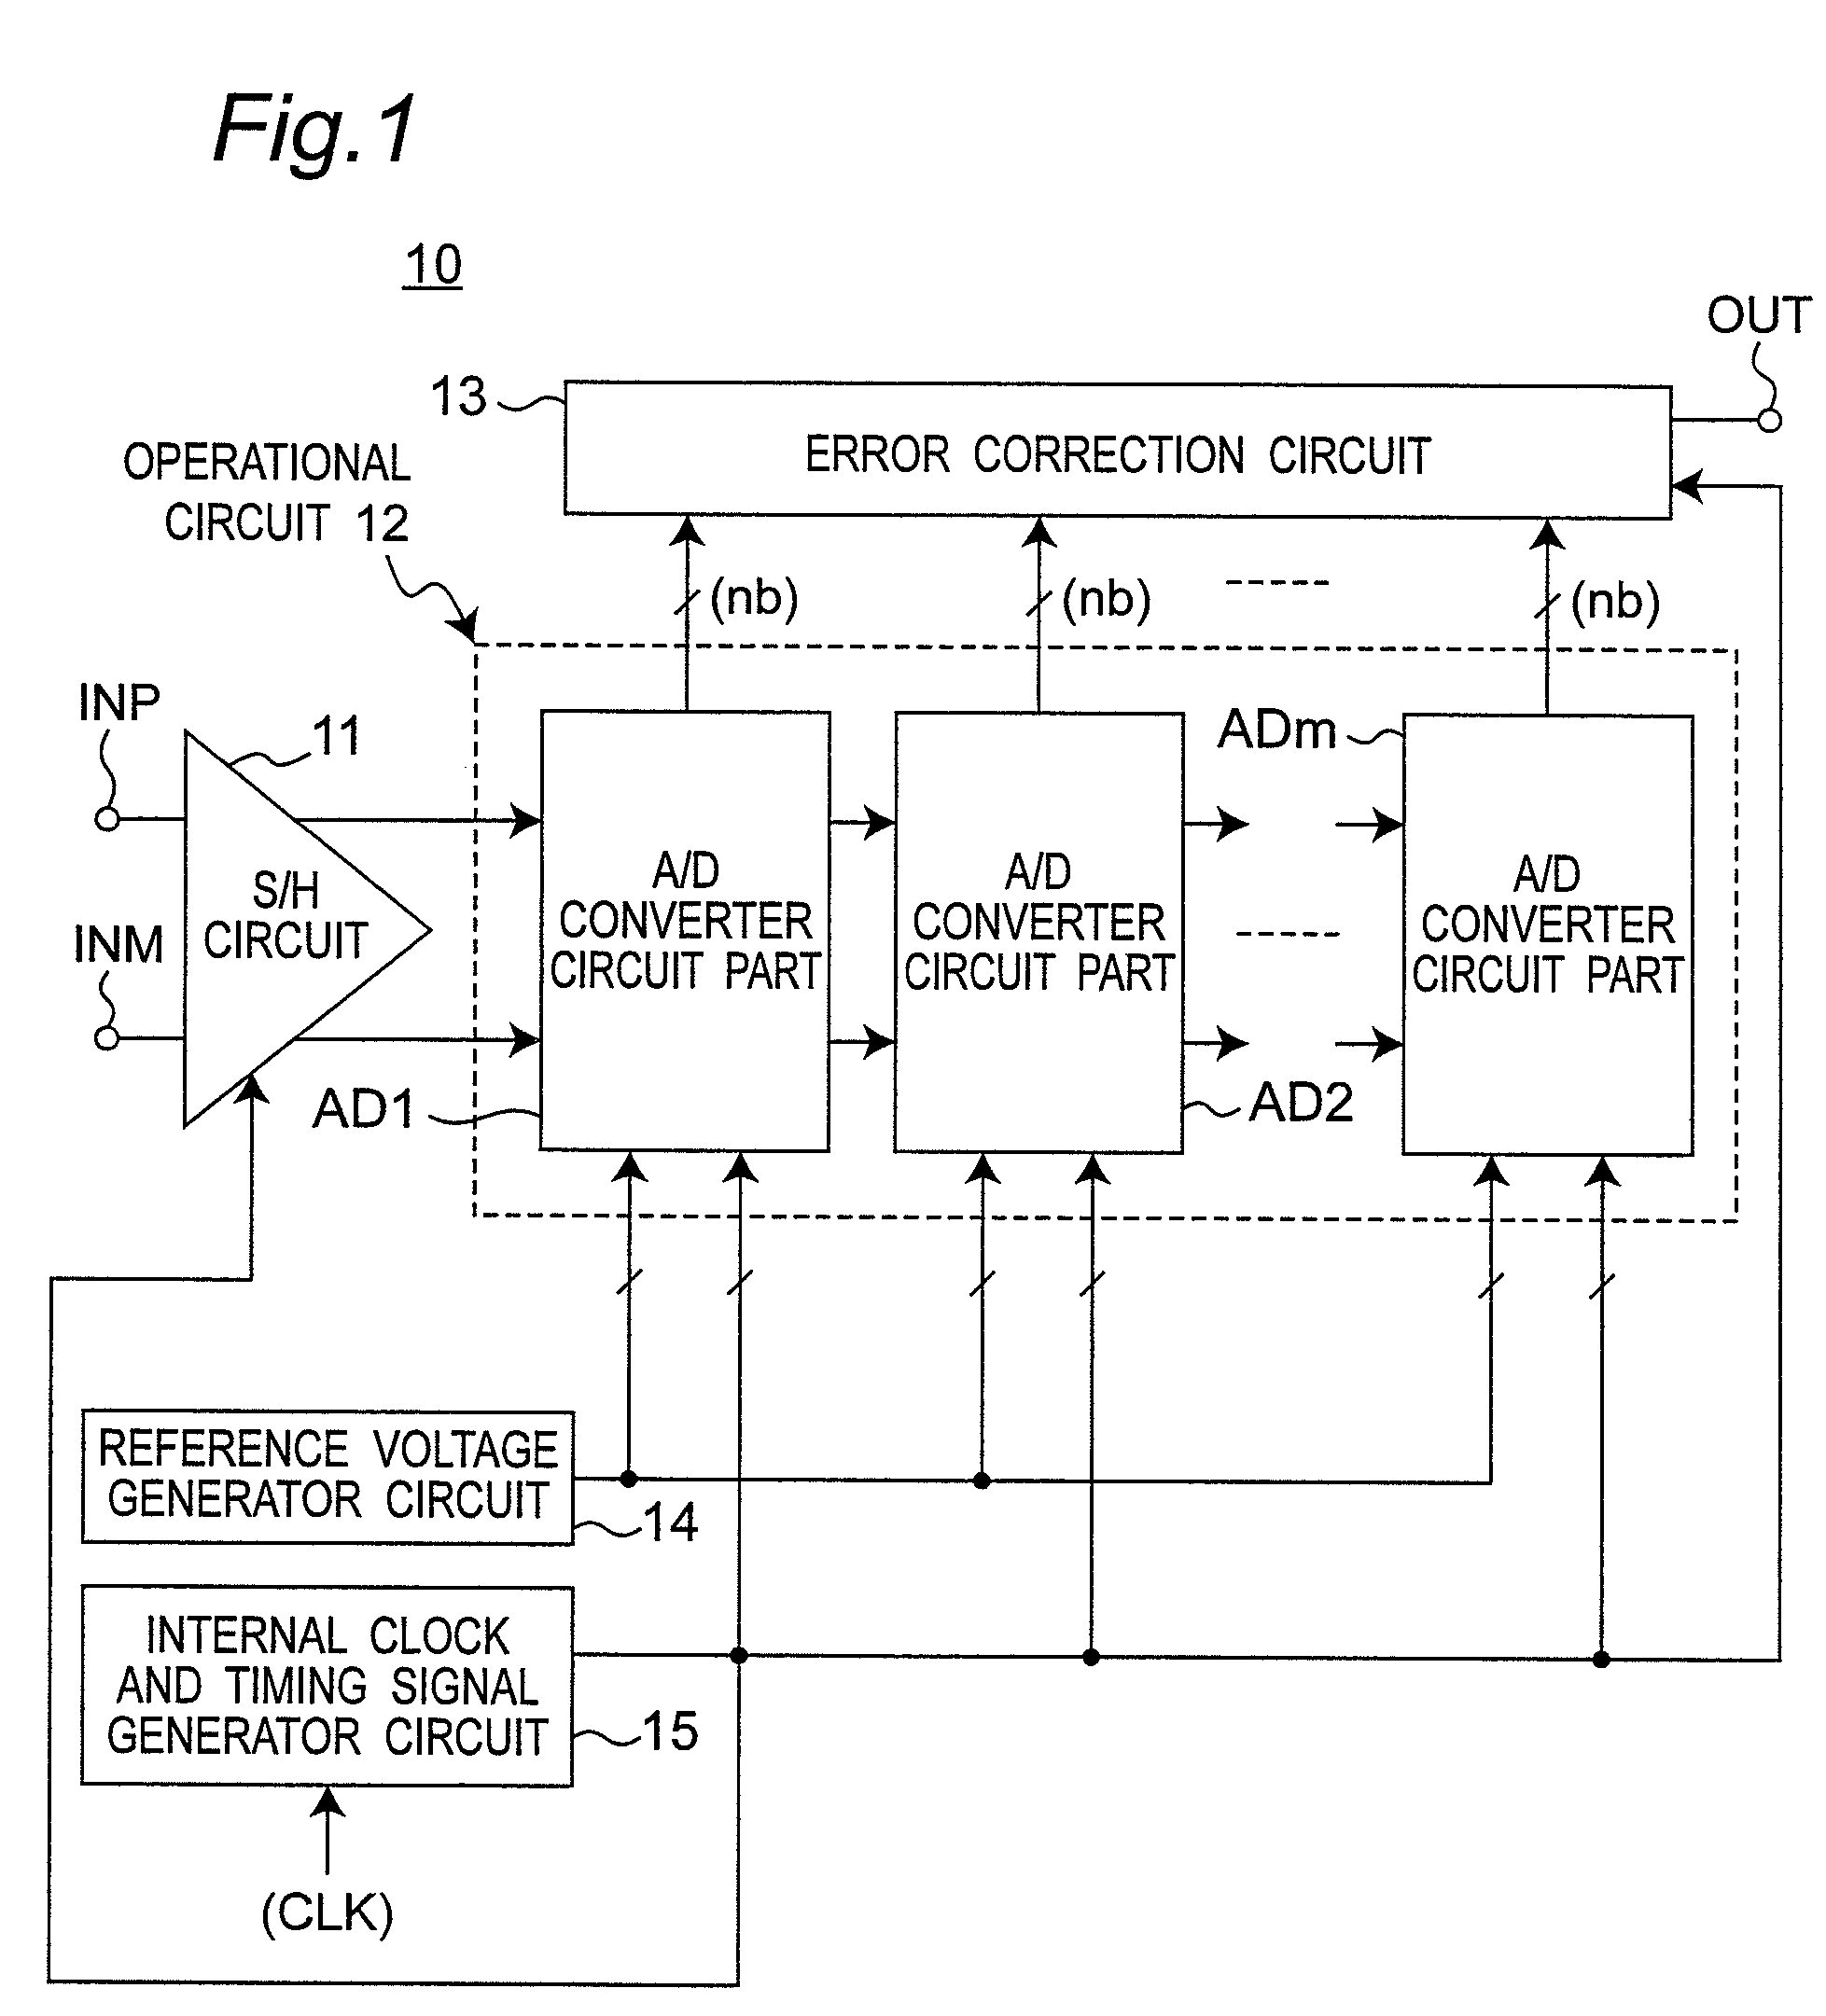 Pipeline type A/D converter apparatus provided with precharge circuit for precharging sampling capacitor